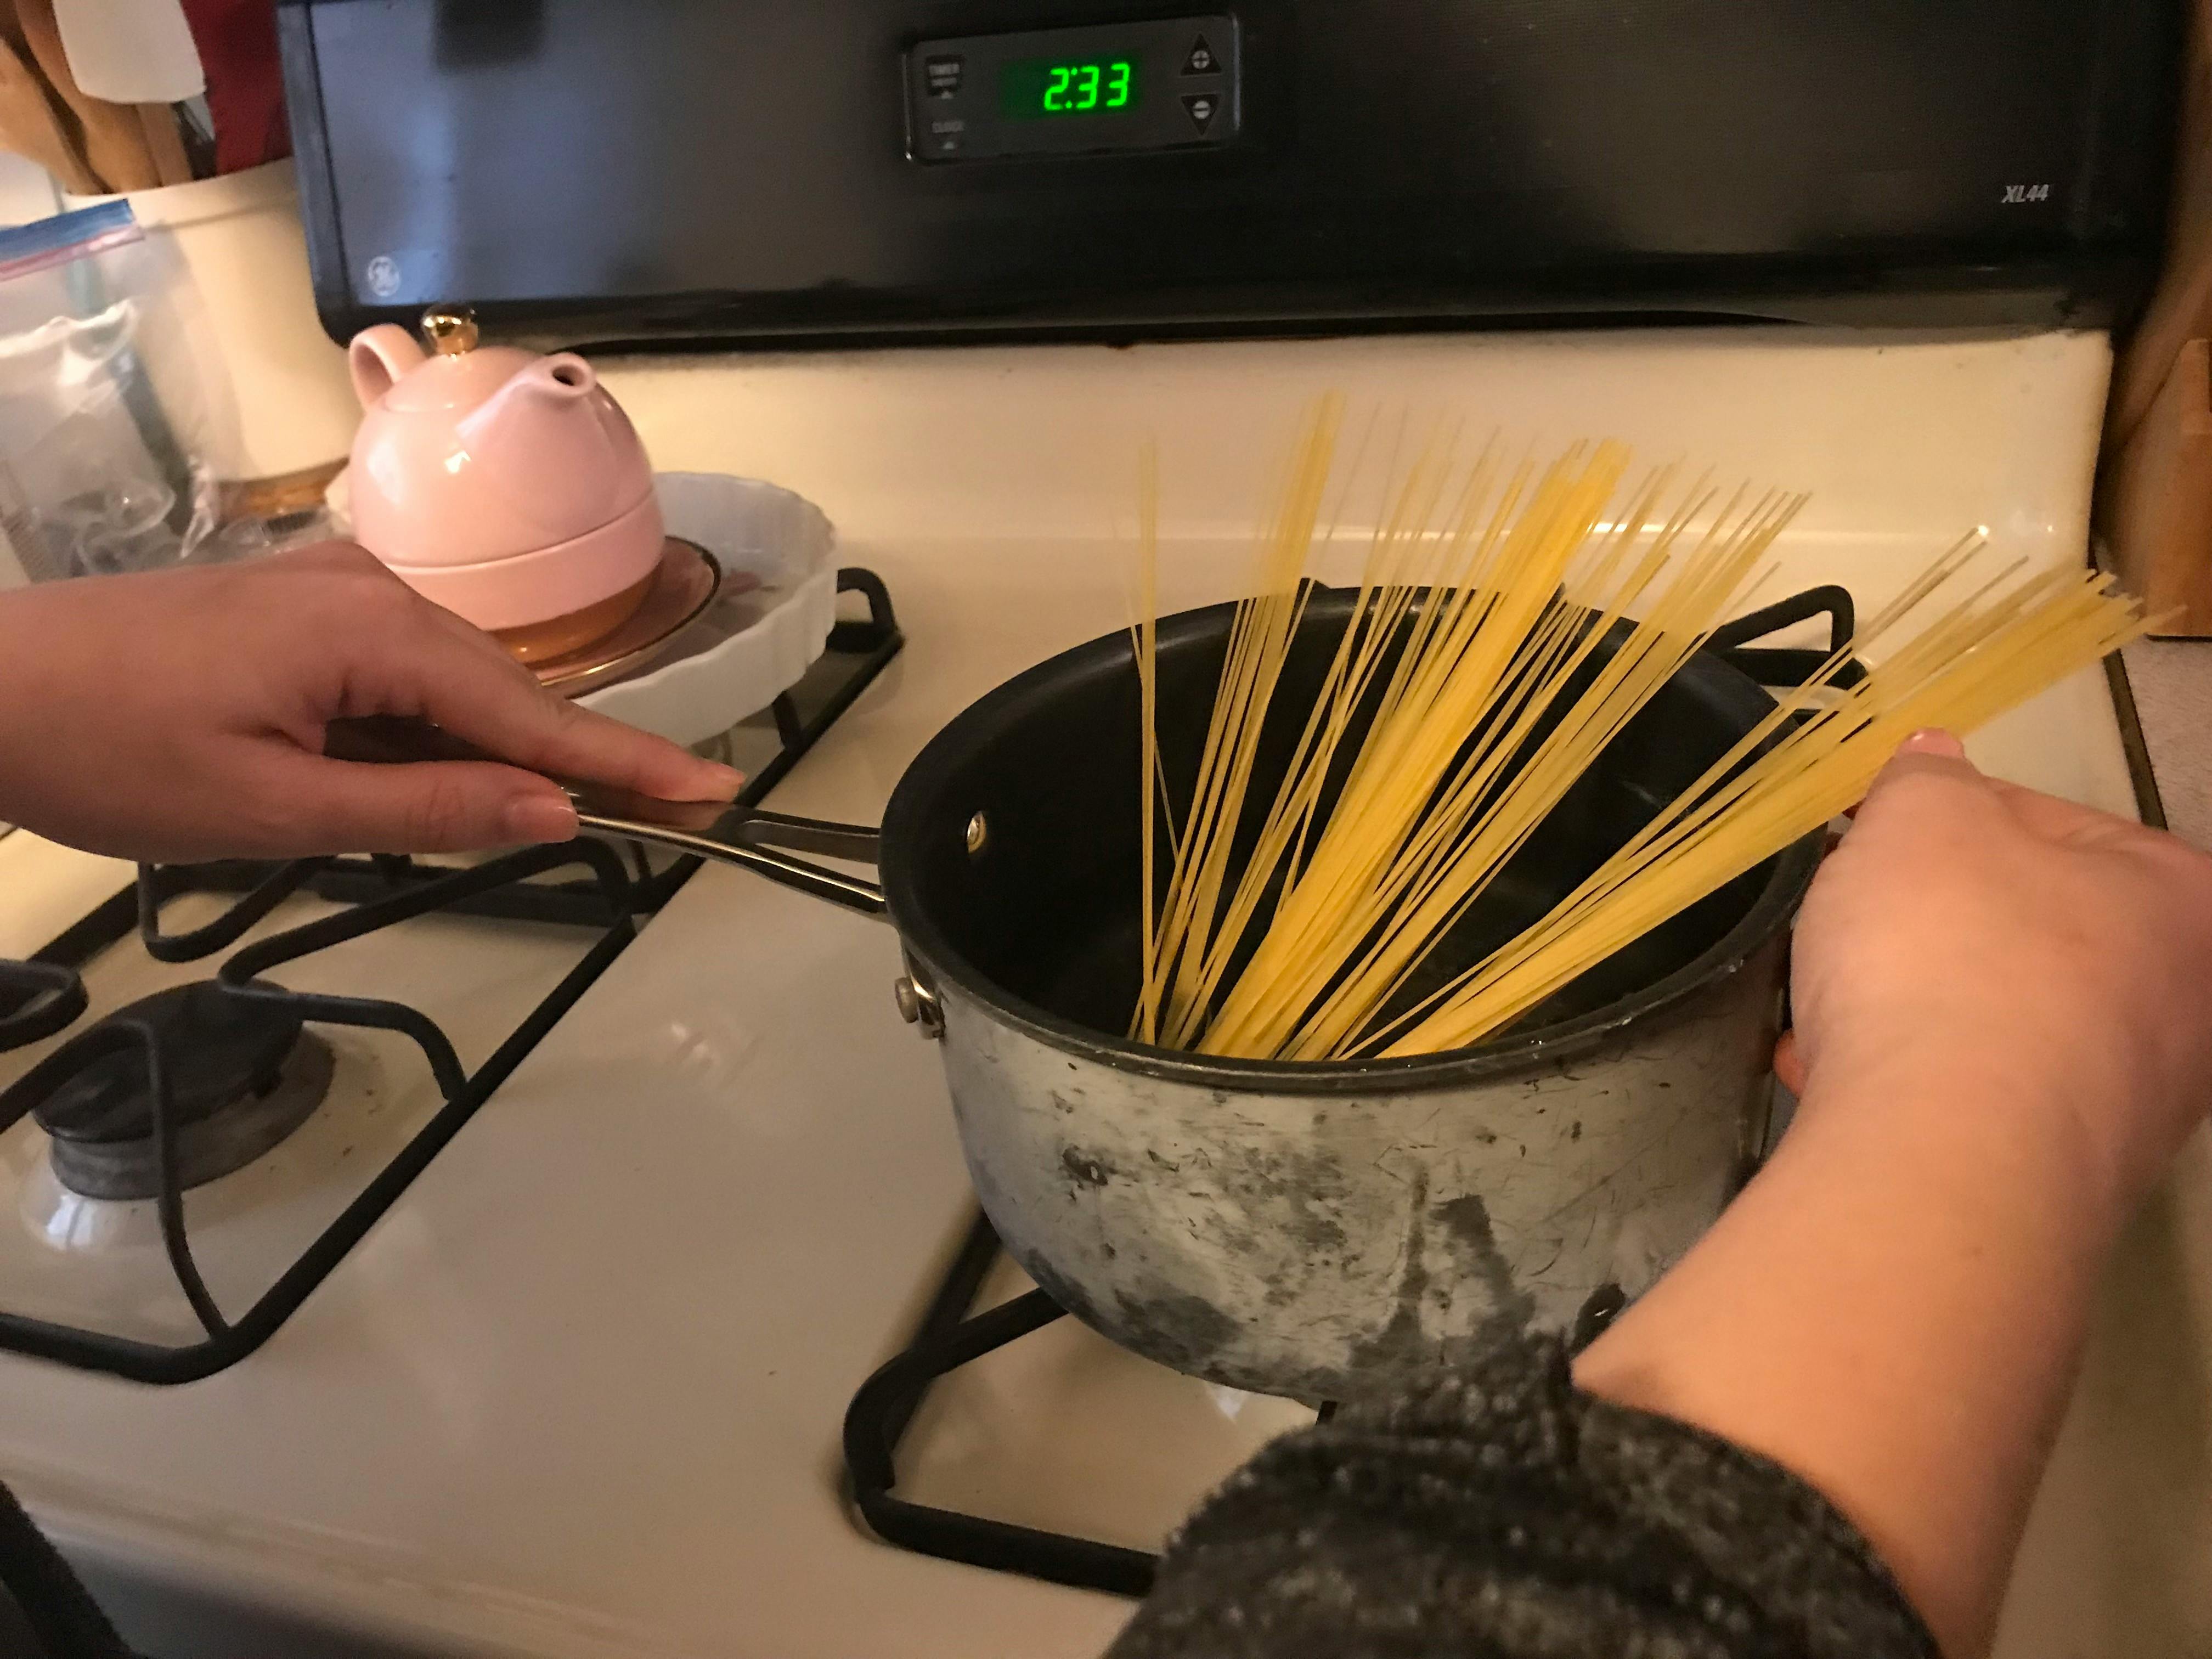 A person holding a pan of pasta on a stove.